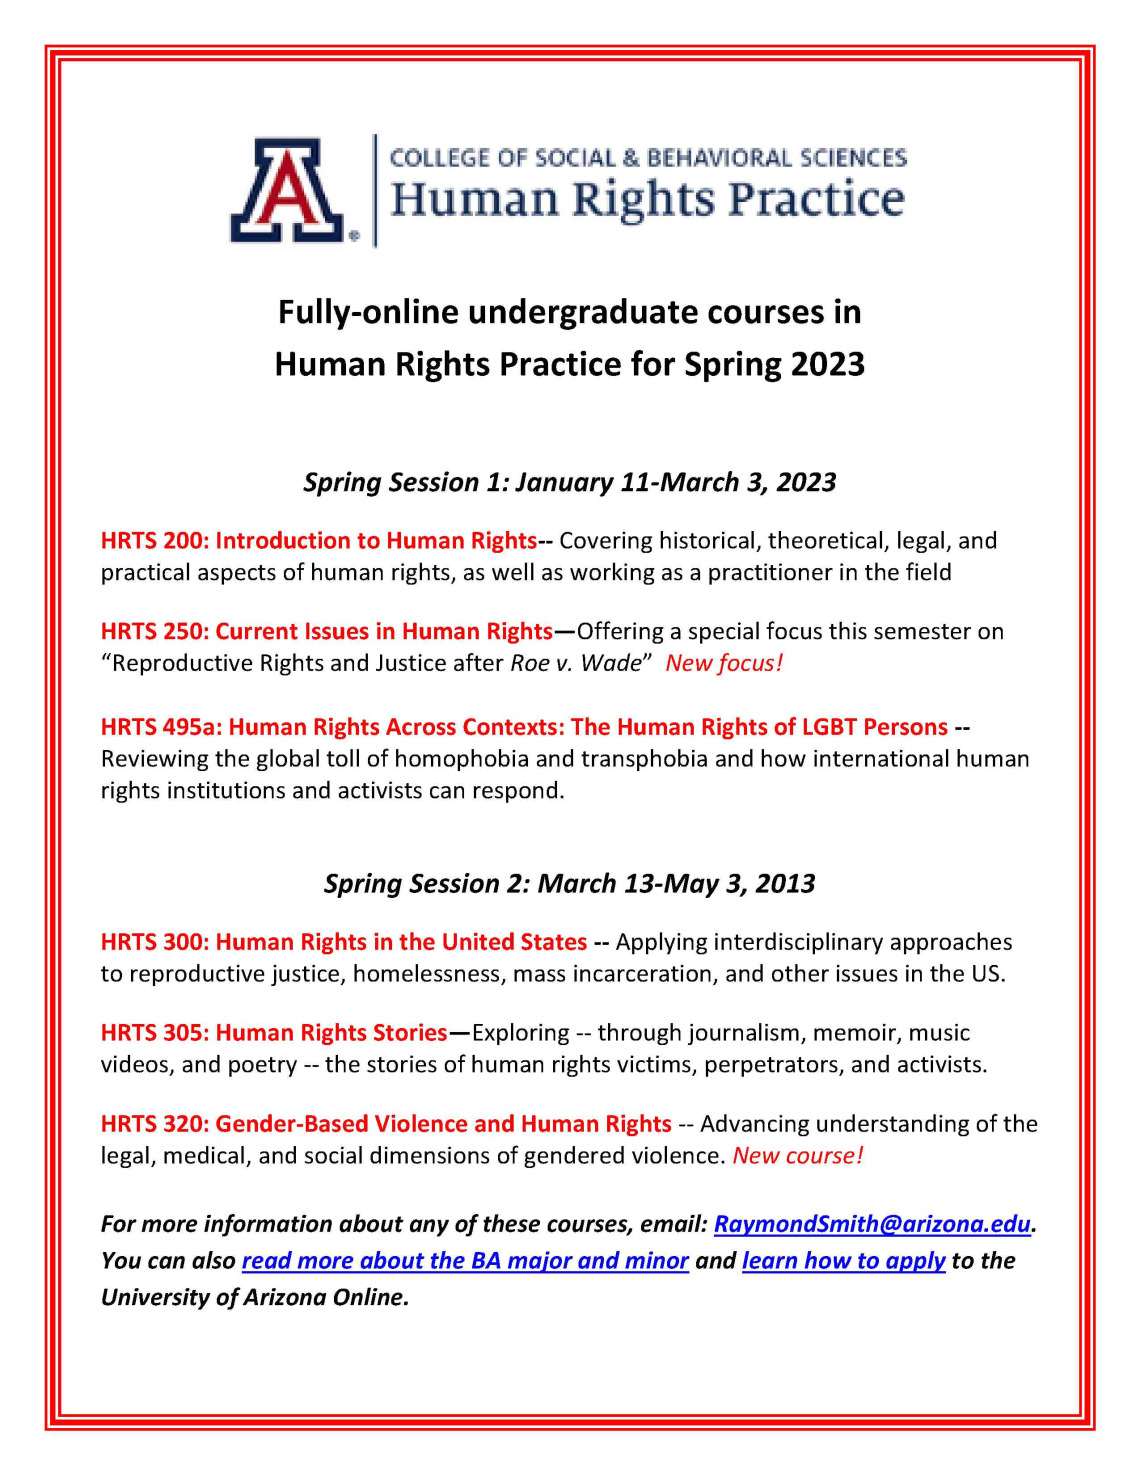 Spring 2023 Human Rights Practice undergraduate courses